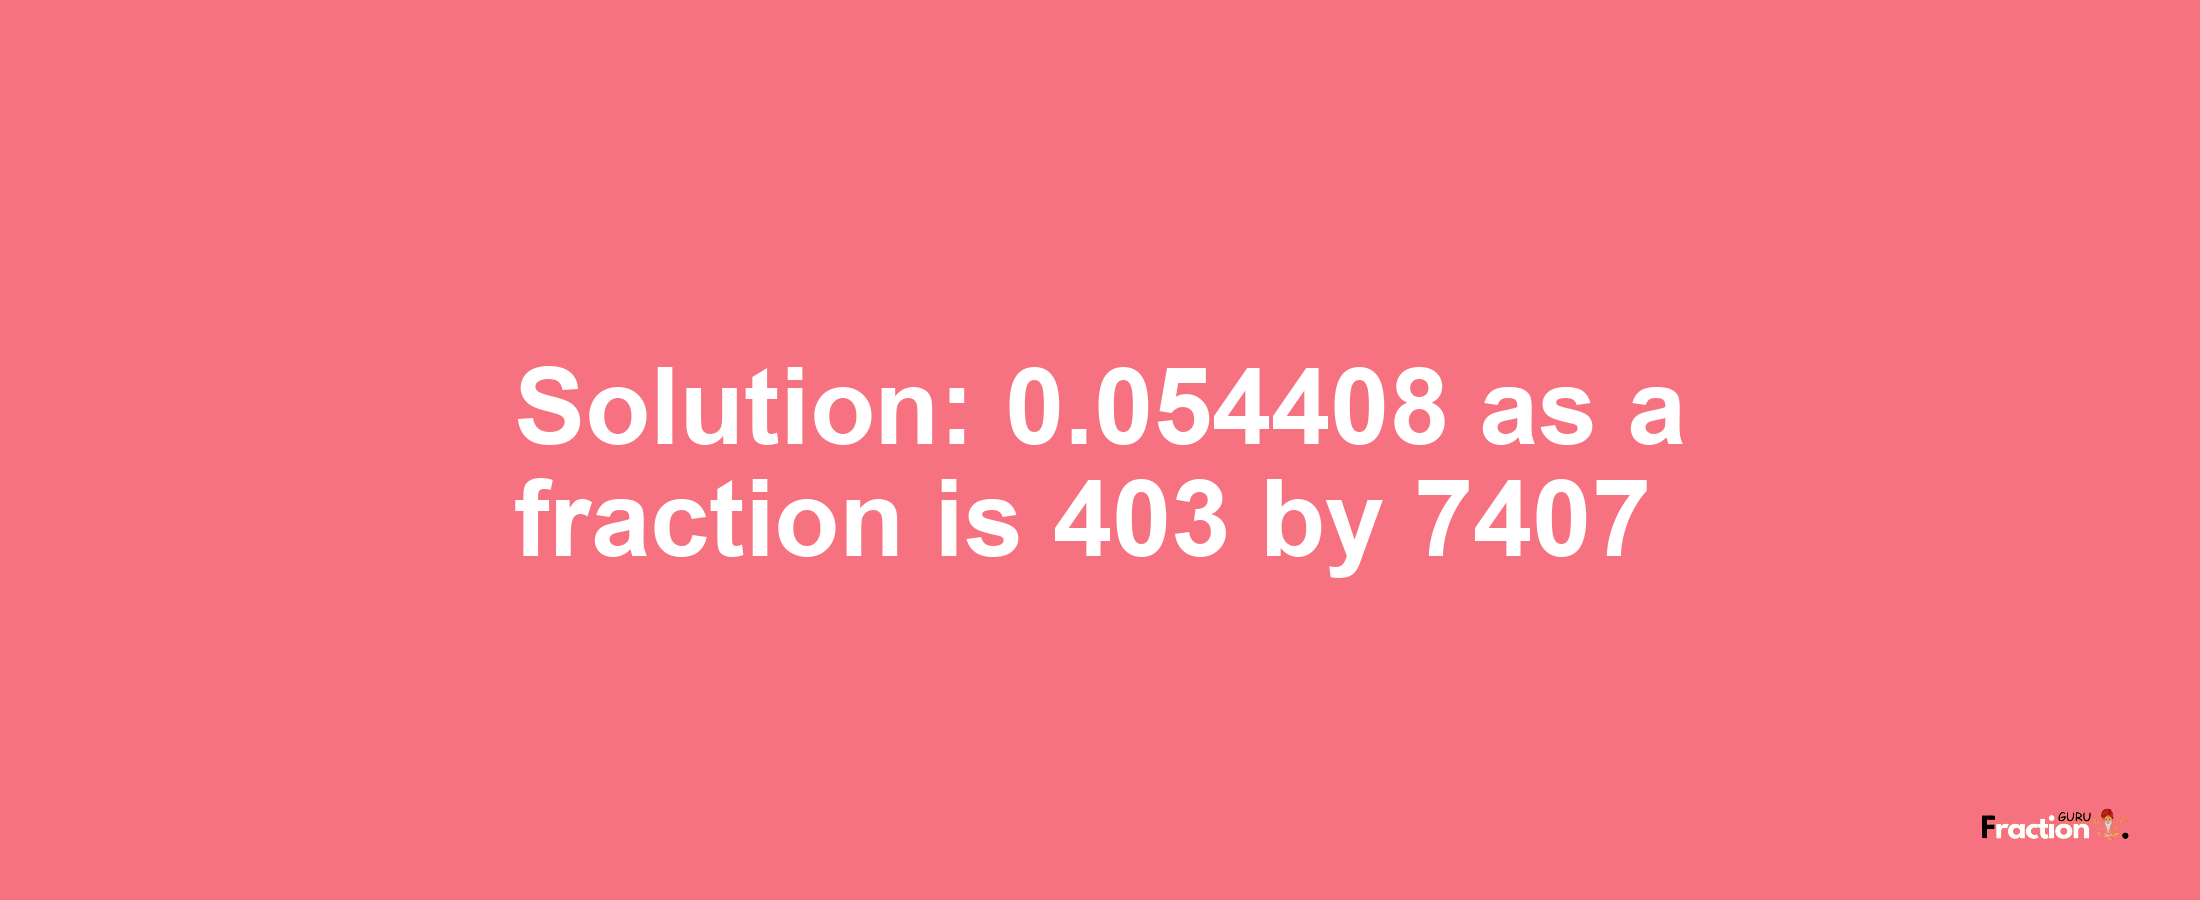 Solution:0.054408 as a fraction is 403/7407